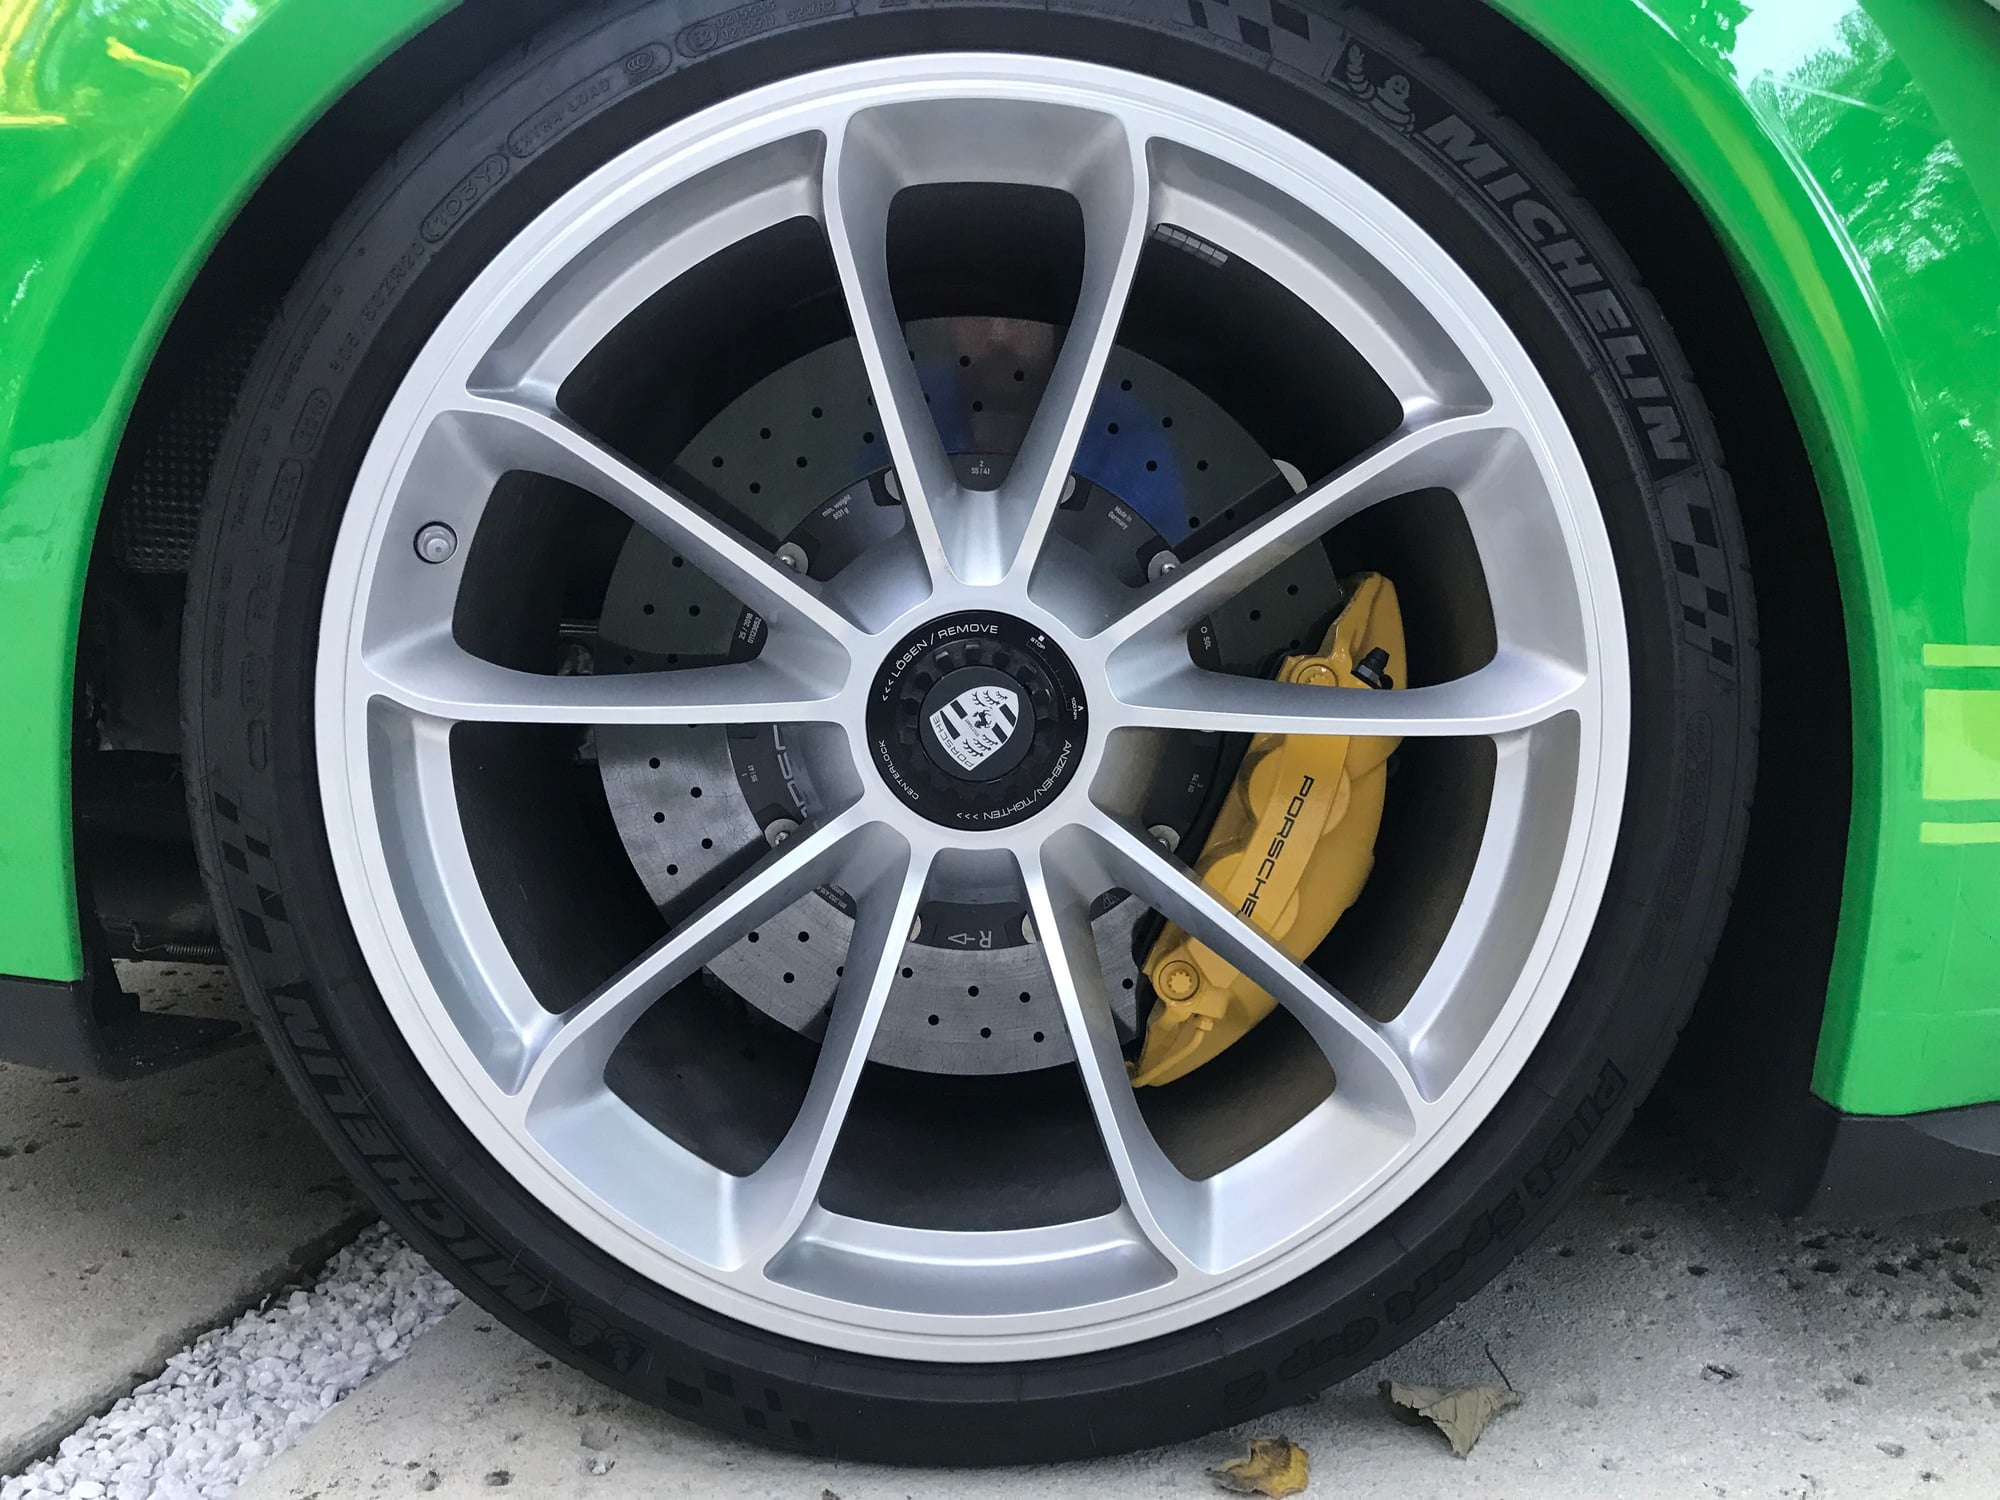 Wheels and Tires/Axles - FS: 2018 991.2 GT3 Stock OEM Silver Wheels / Rims Set - Used - 2014 to 2019 Porsche GT3 - Miami, FL 33133, United States